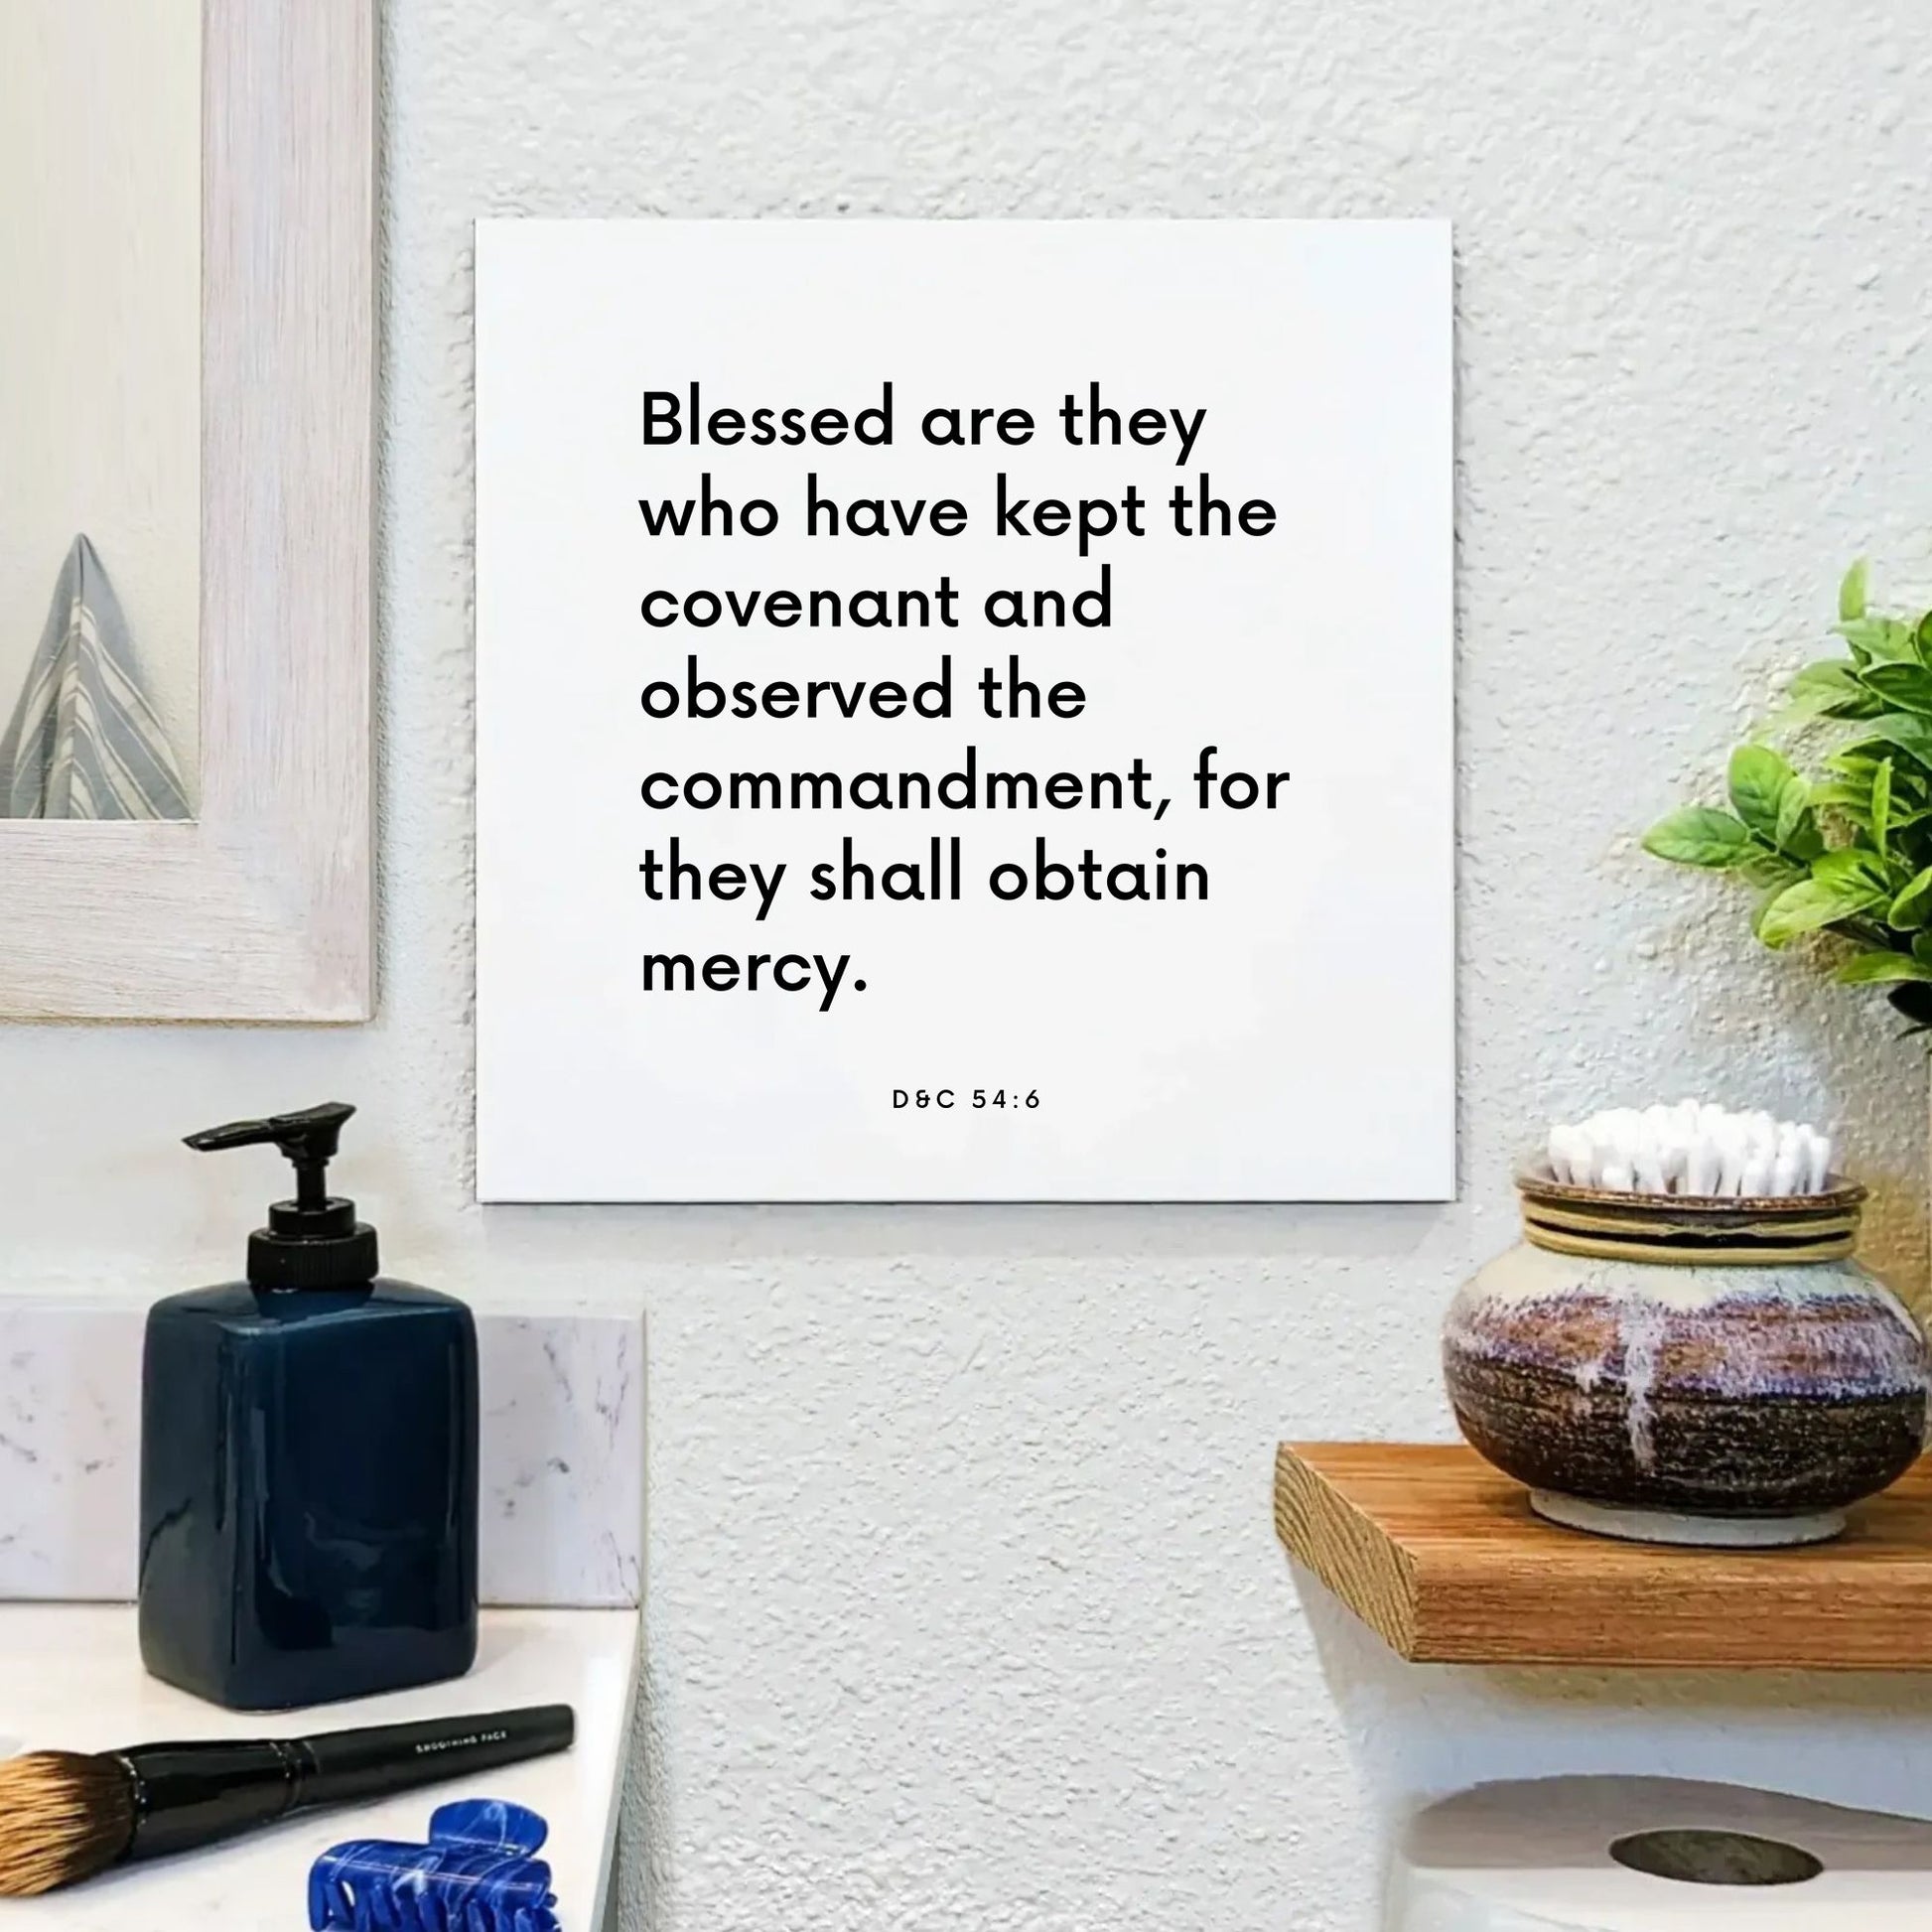 Bathroom mouting of the scripture tile for D&C 54:6 - "Blessed are they who have kept the covenant"